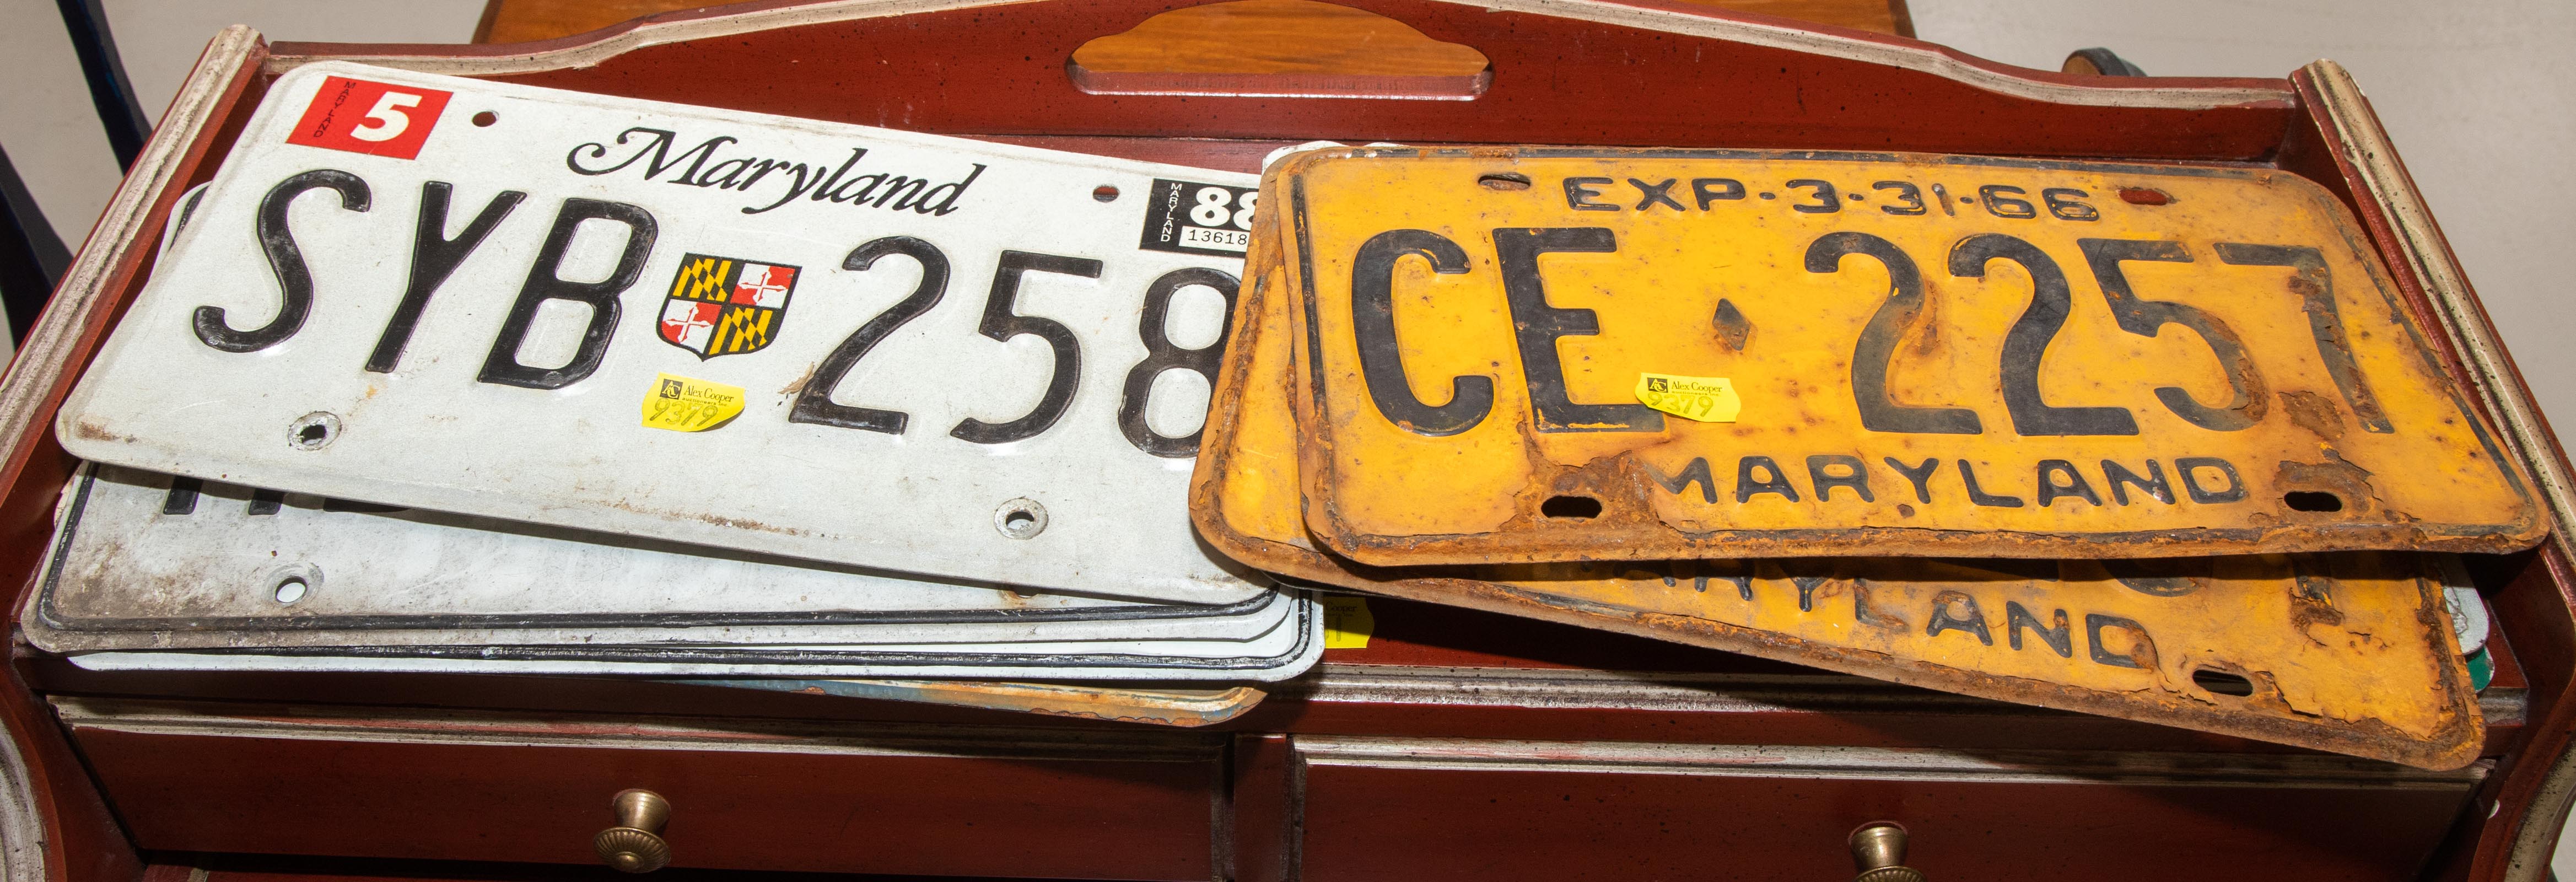 ASSORTED LICENSE PLATES Includes 2882c9